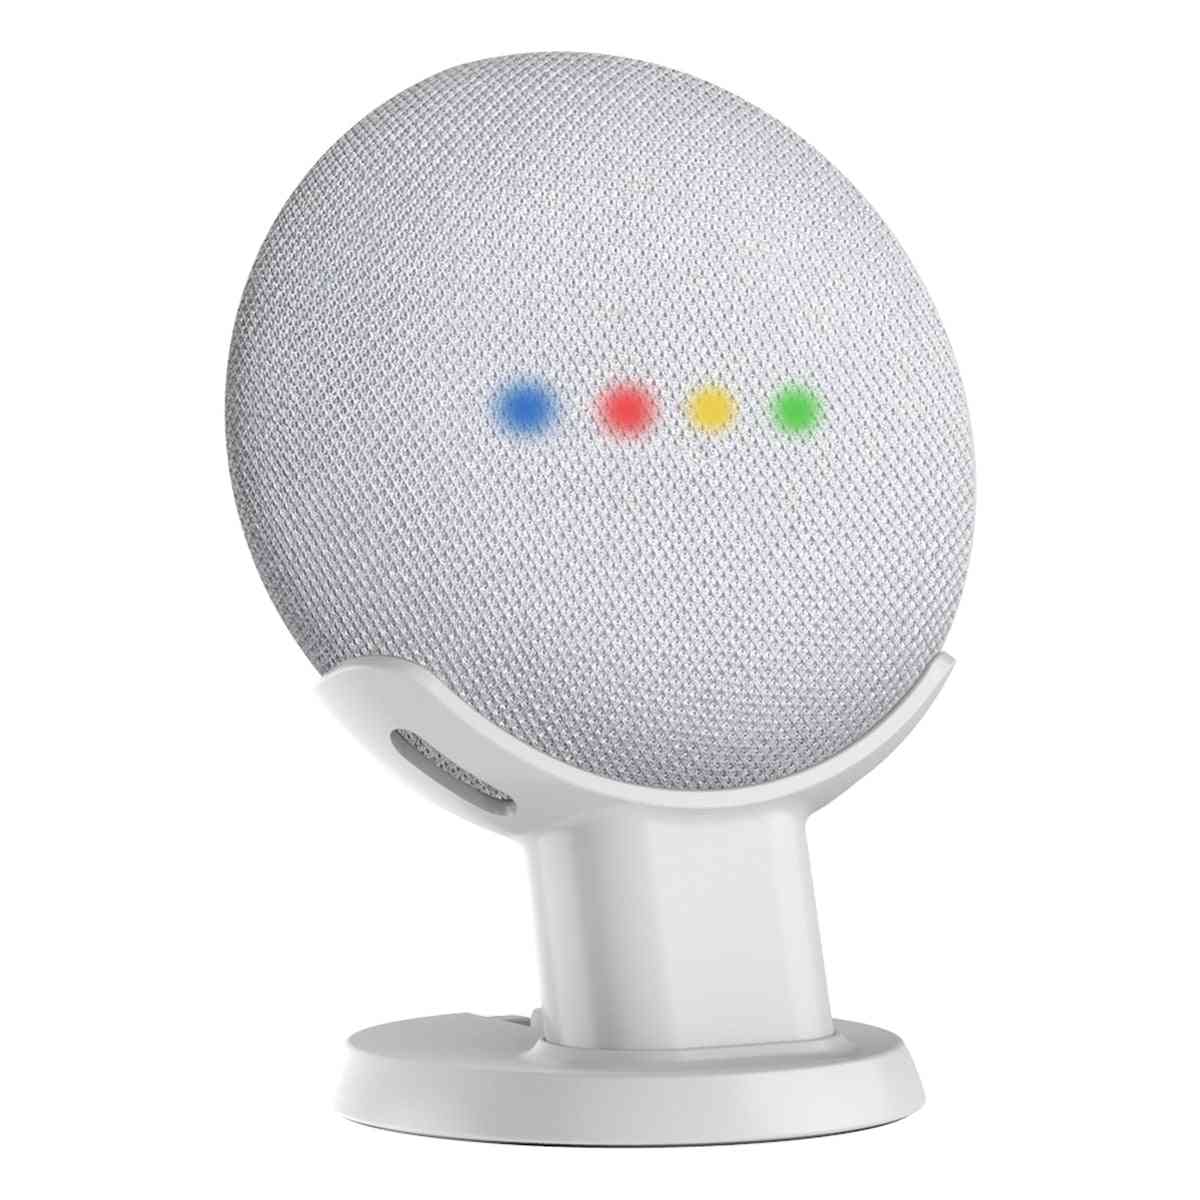 Mini Voice Assistants Compact Holder - Plug In For Google Home